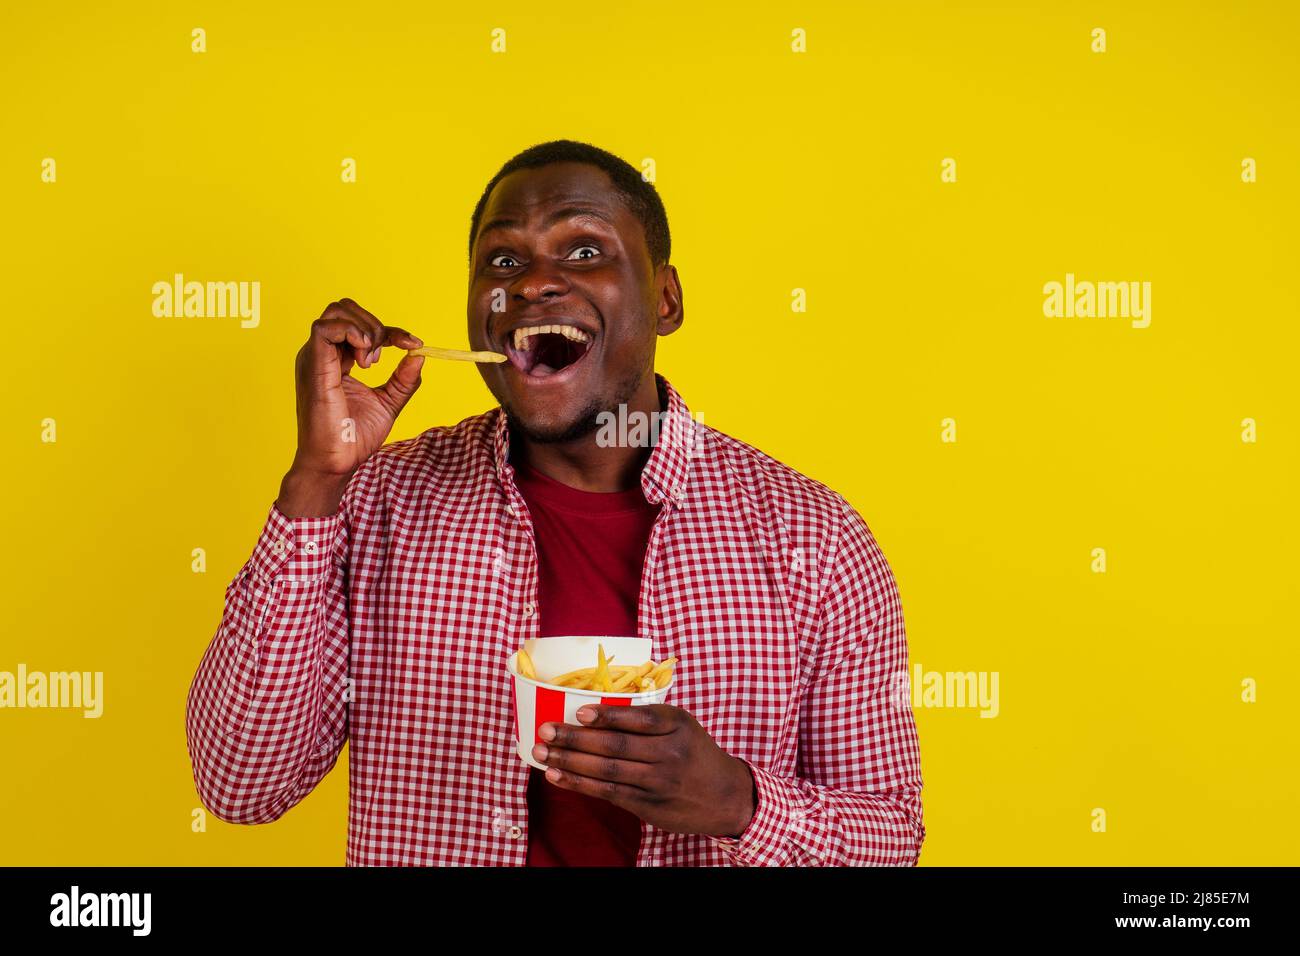 handsome latin man eating fries with appetite and enjoyment in studio yellow background Stock Photo